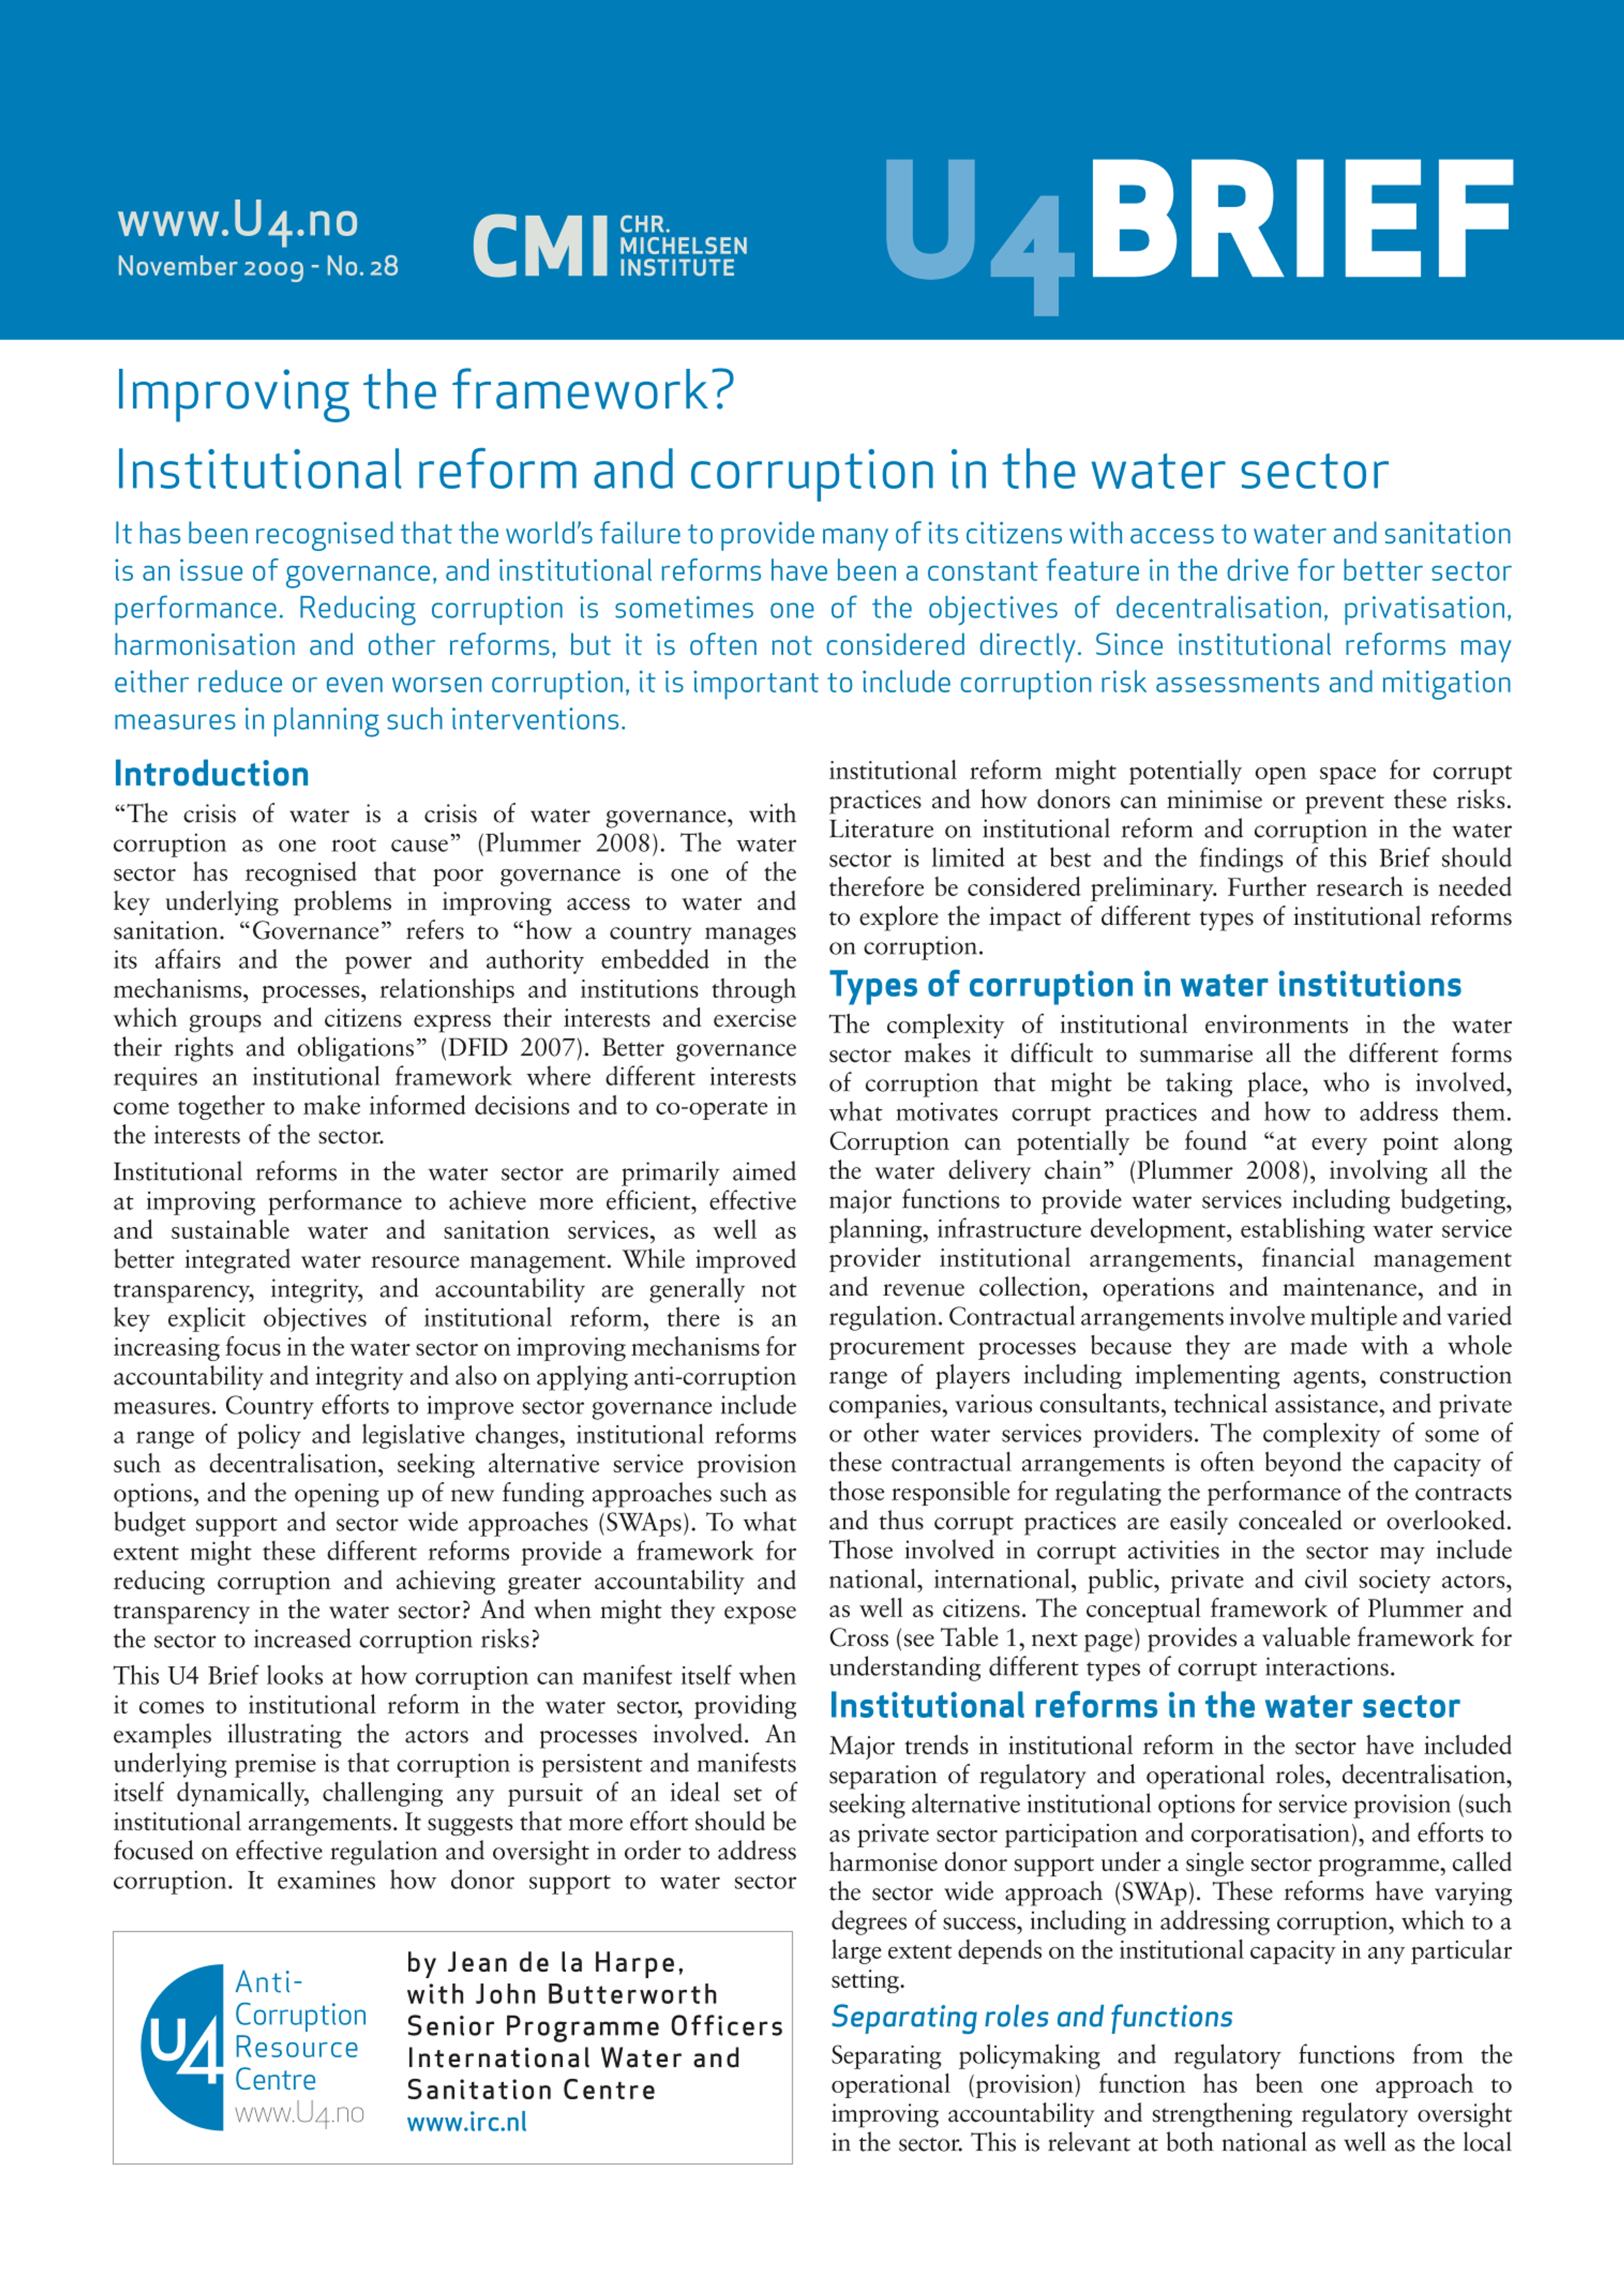 Improving the framework? Institutional reform and corruption in the water sector